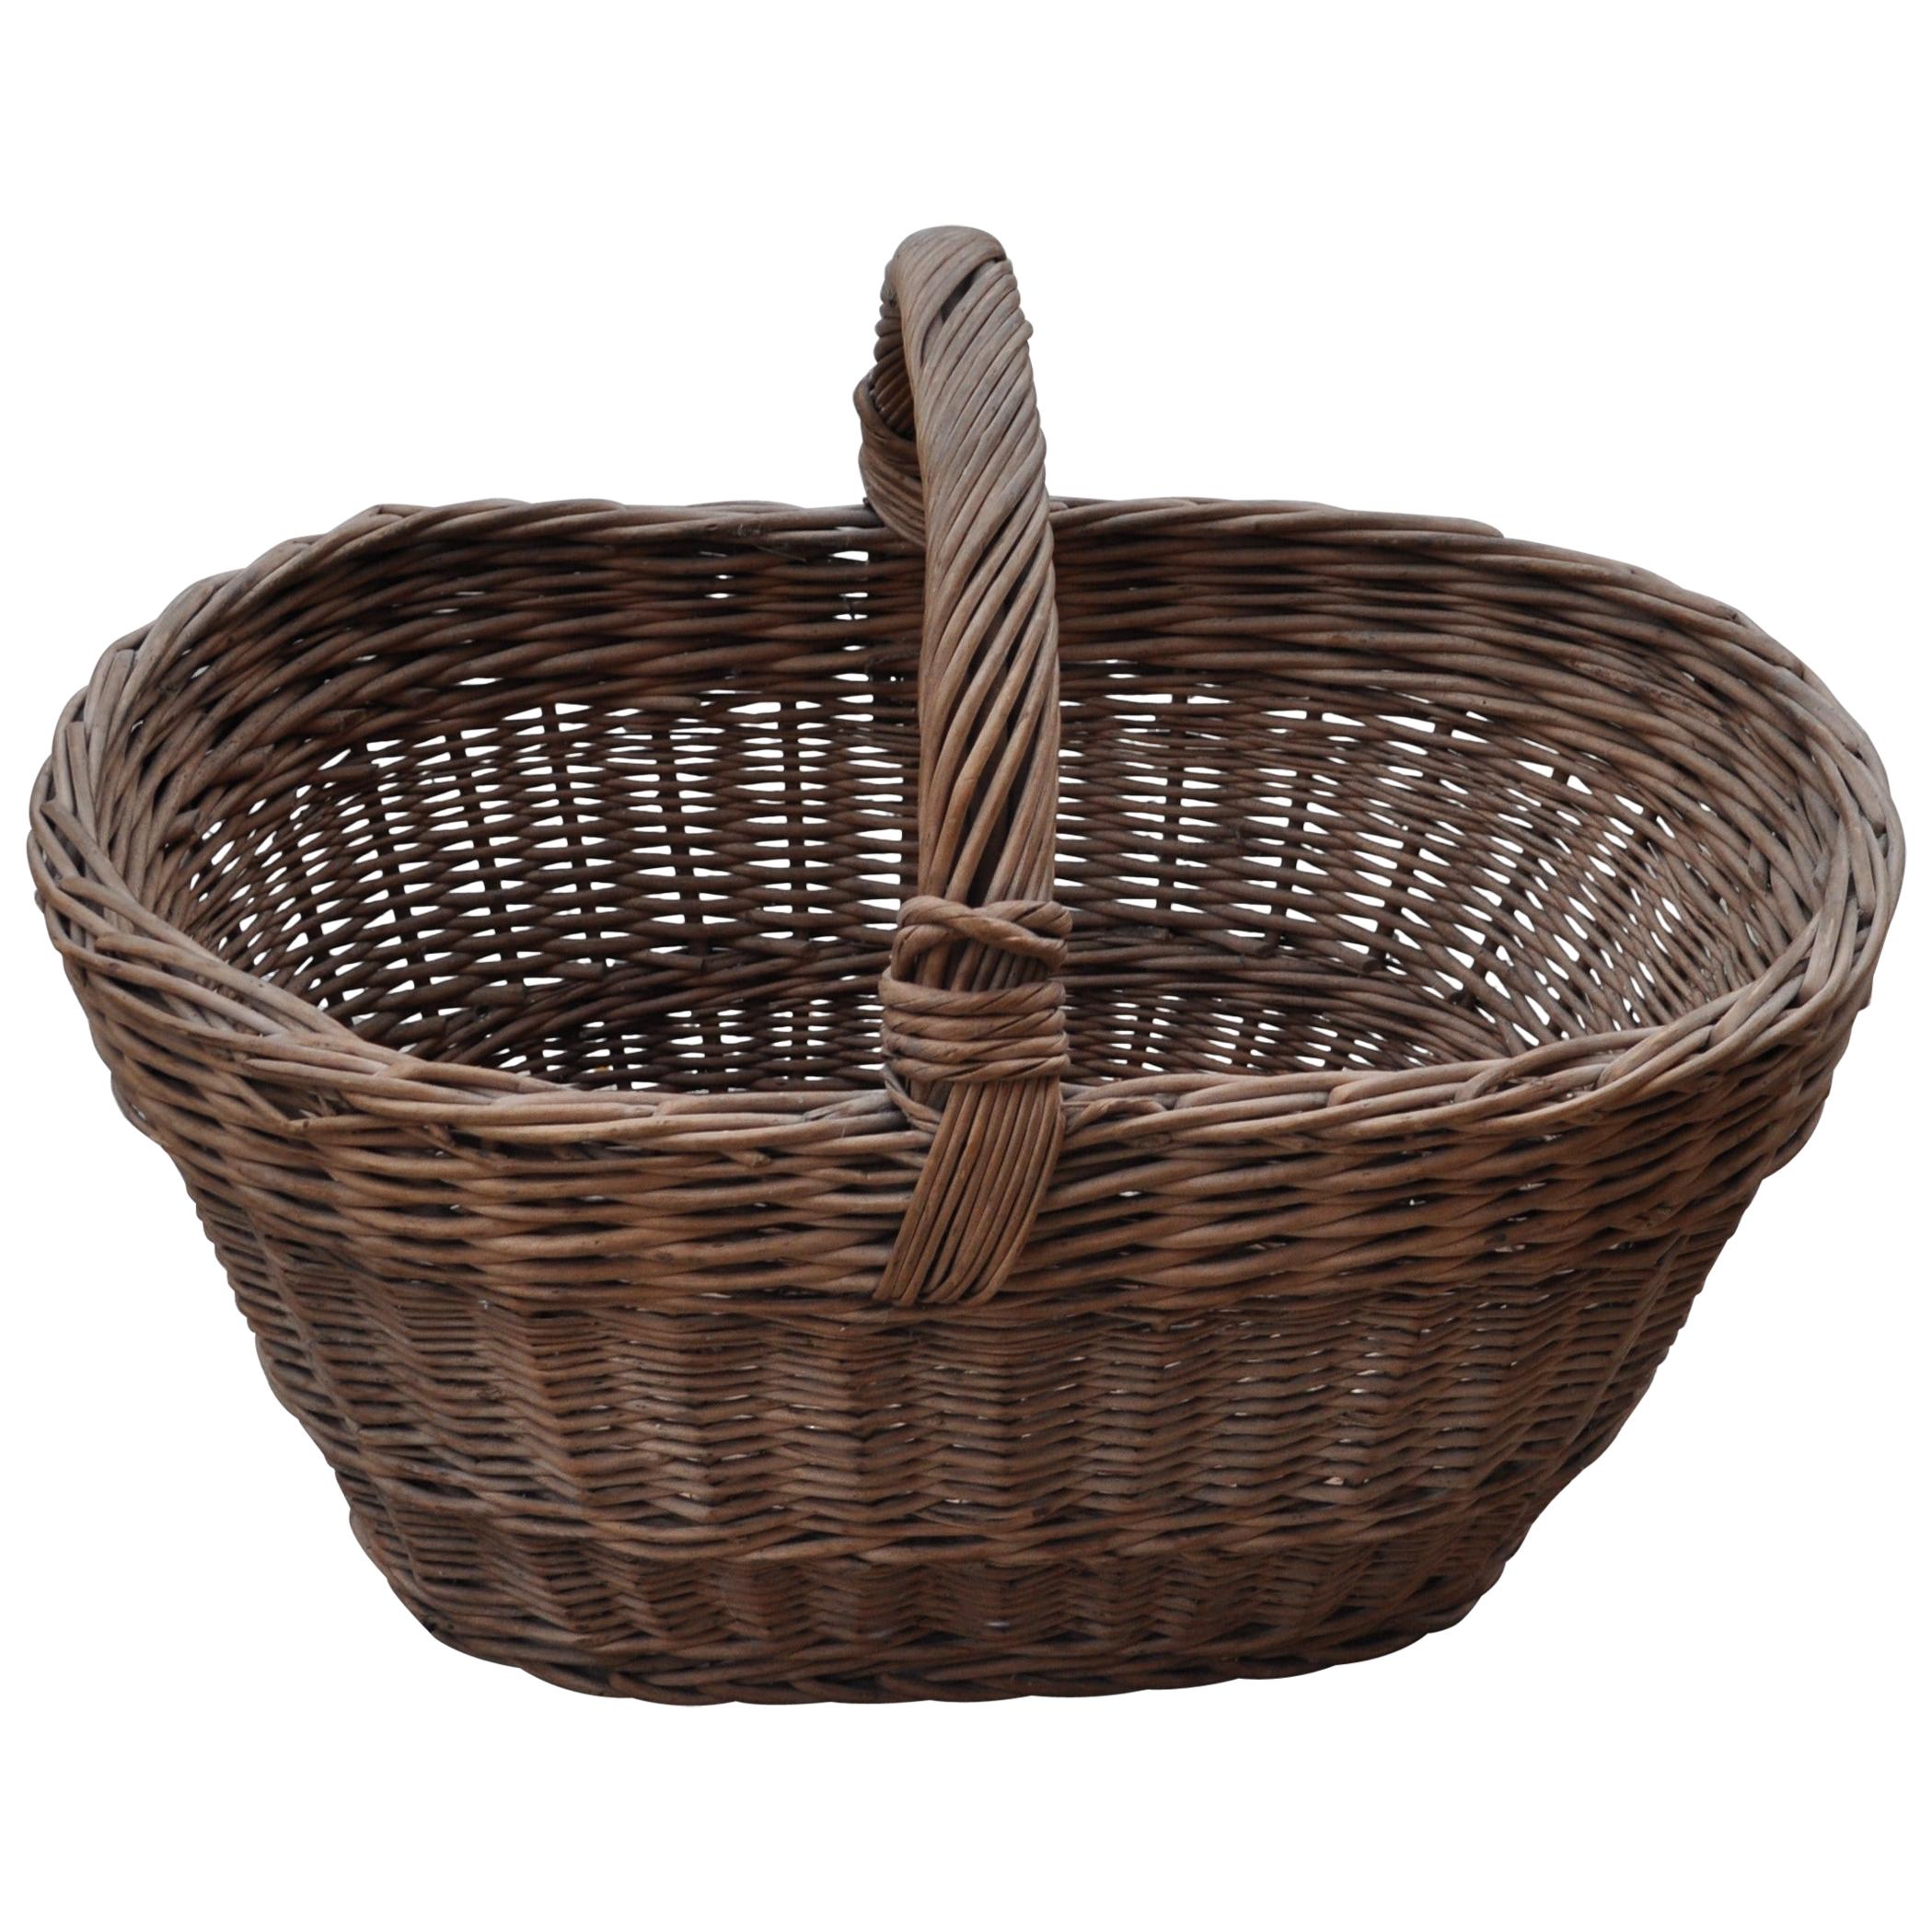 Old Handwoven Wicker Basket For Sale